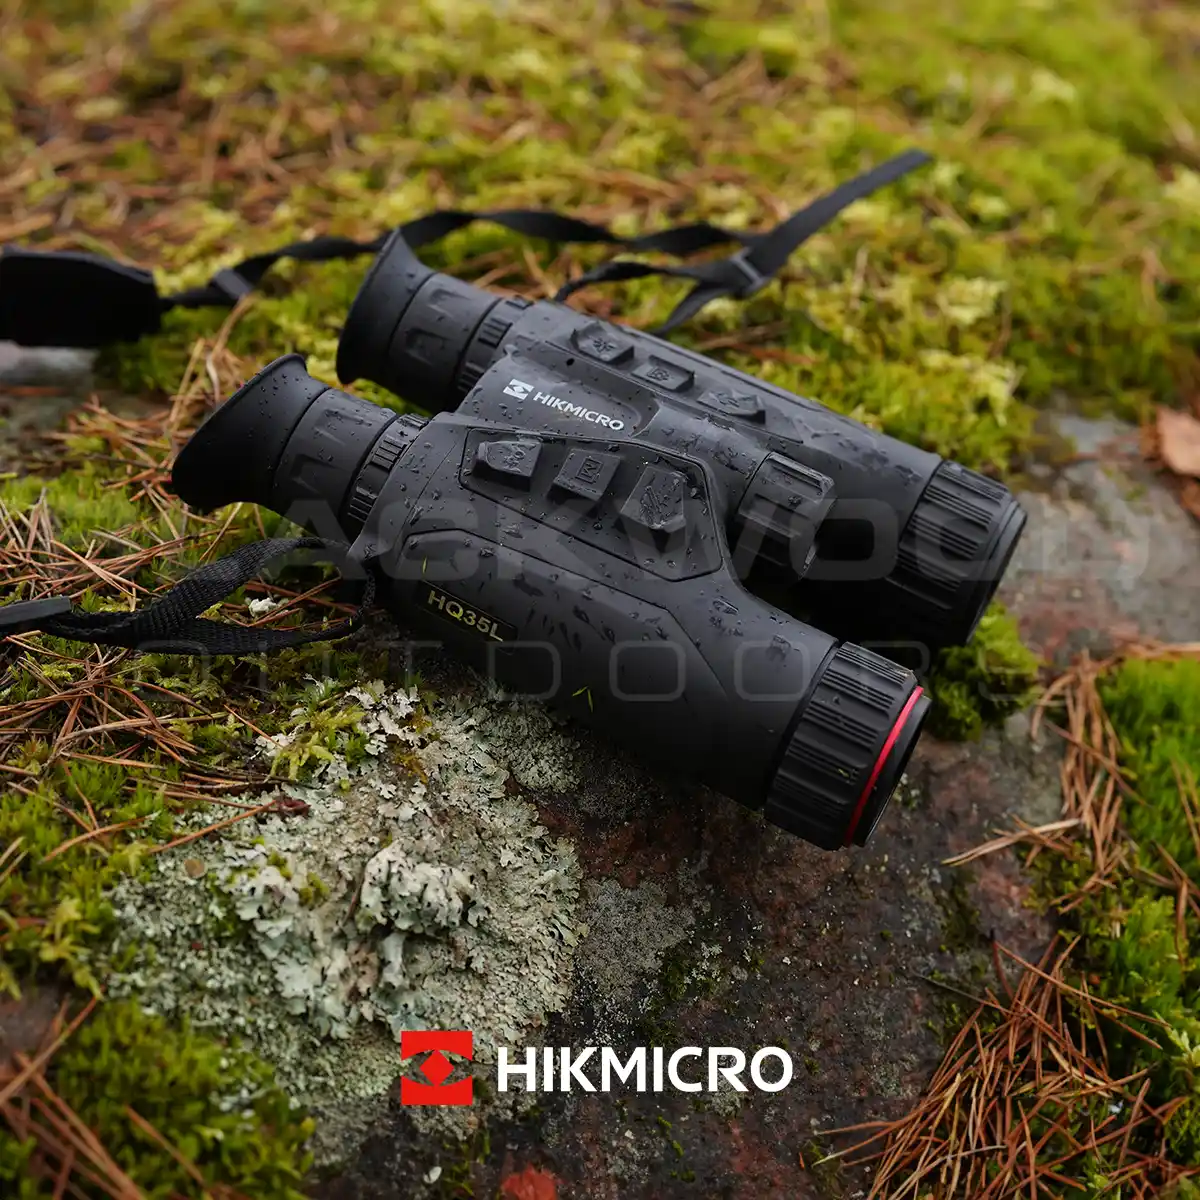 HikMicro Habrok HQ35L Thermal Binoculars with LRF and Multi Spectral Function